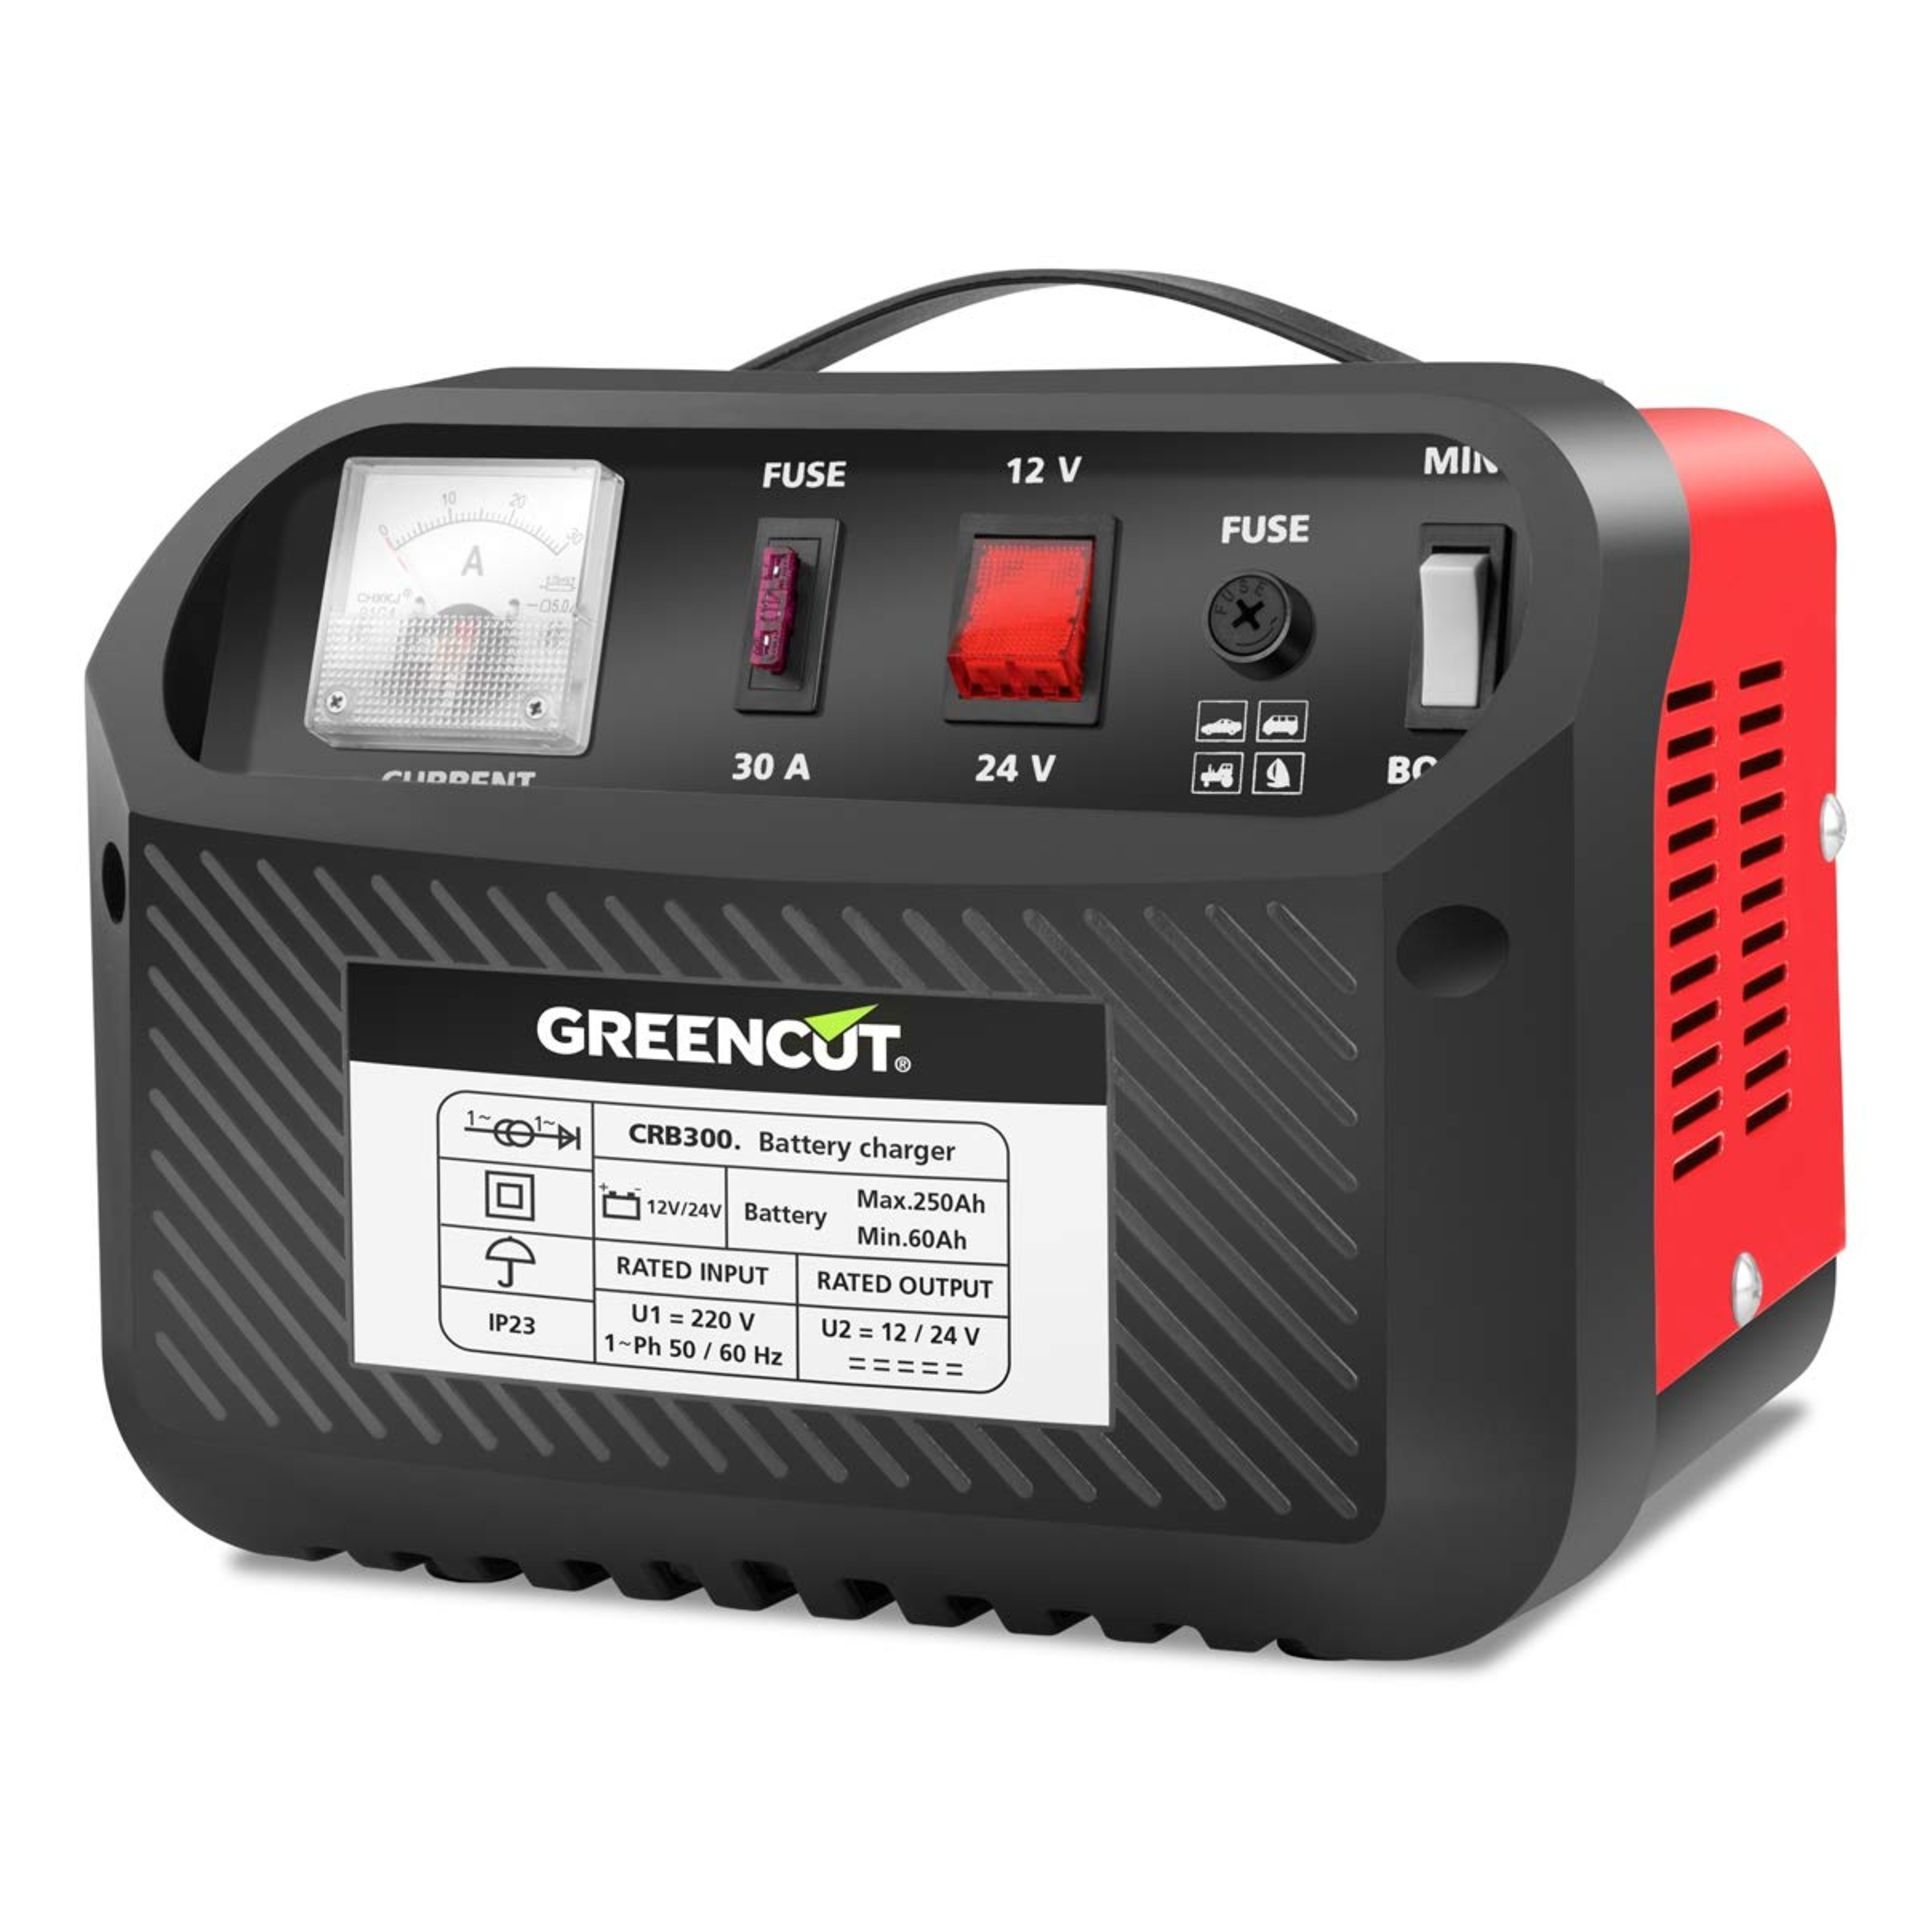 GREENCUT CRB300 Multifunction Battery Charger RRP £79.99.